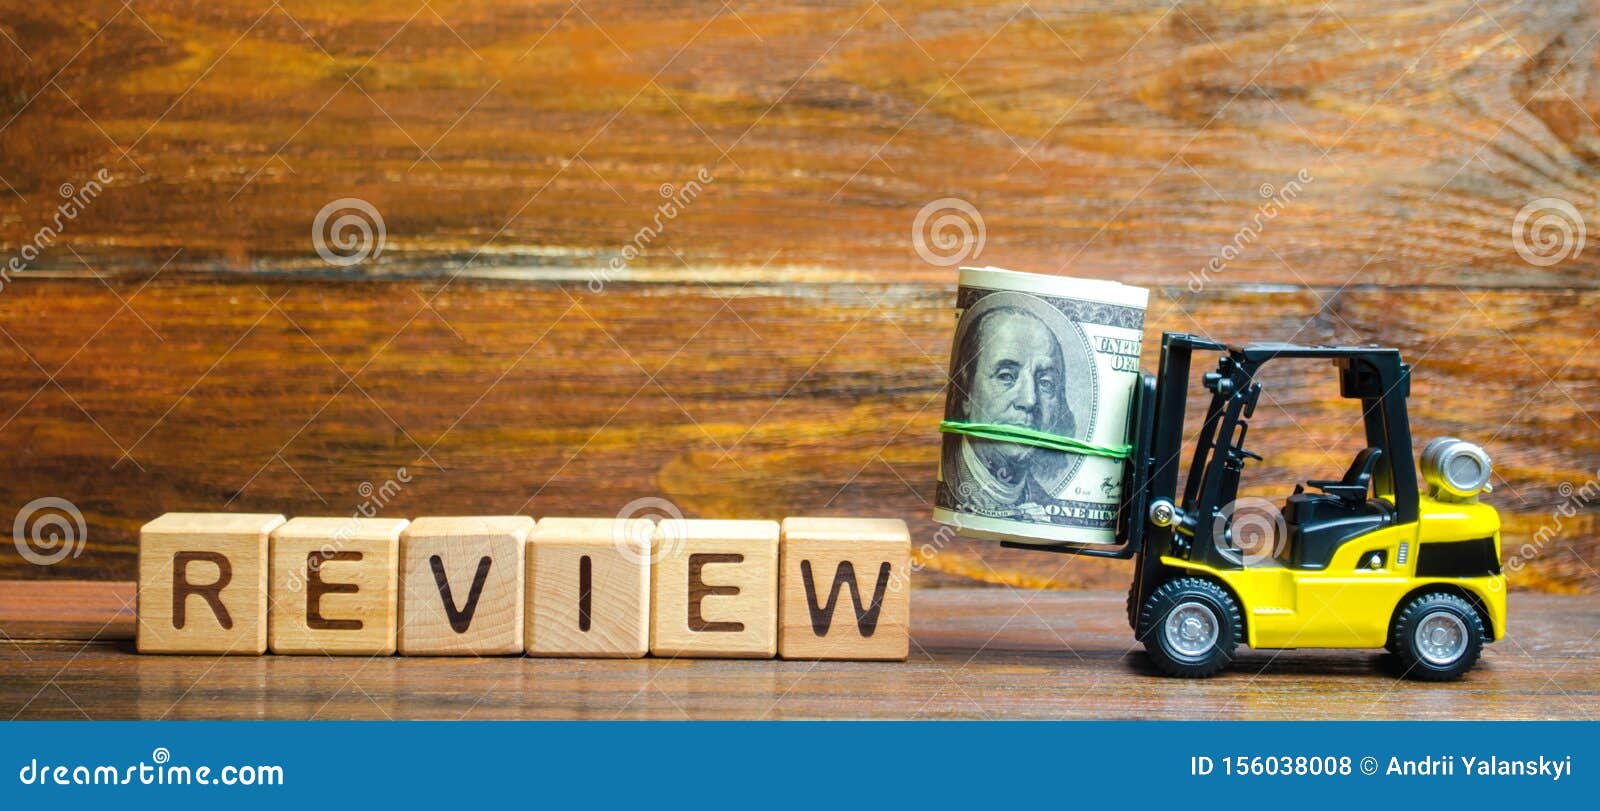 forklift truck carries a bundle of dollars to inscription review. audit of business and enterprises, government agencies